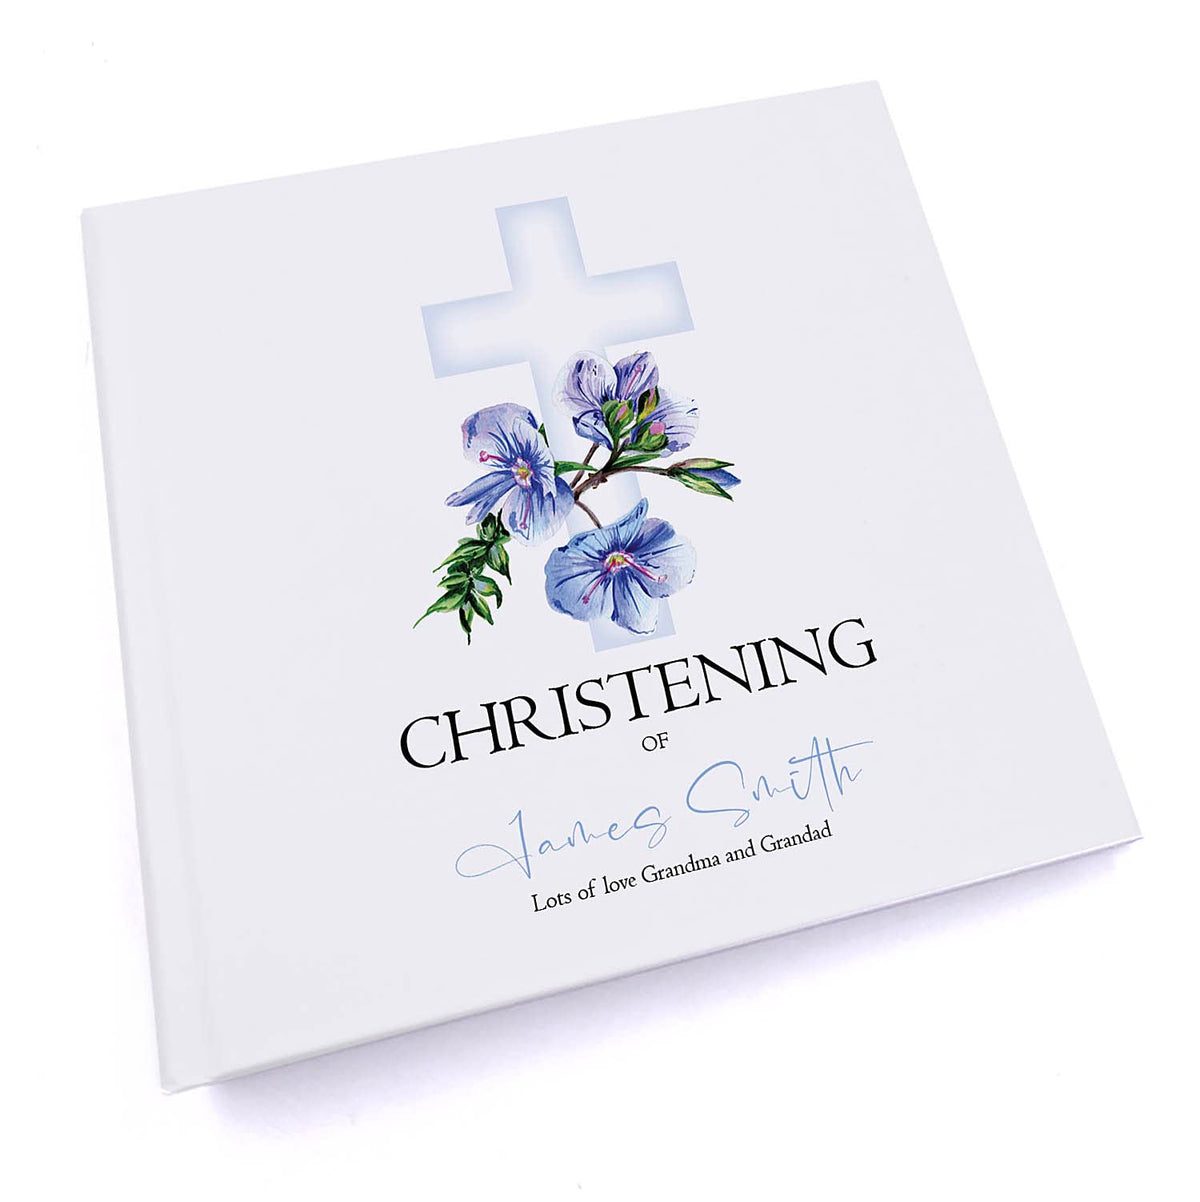 Personalised Christening 6x4" Slip in Photo Album Gift With Blue Cross